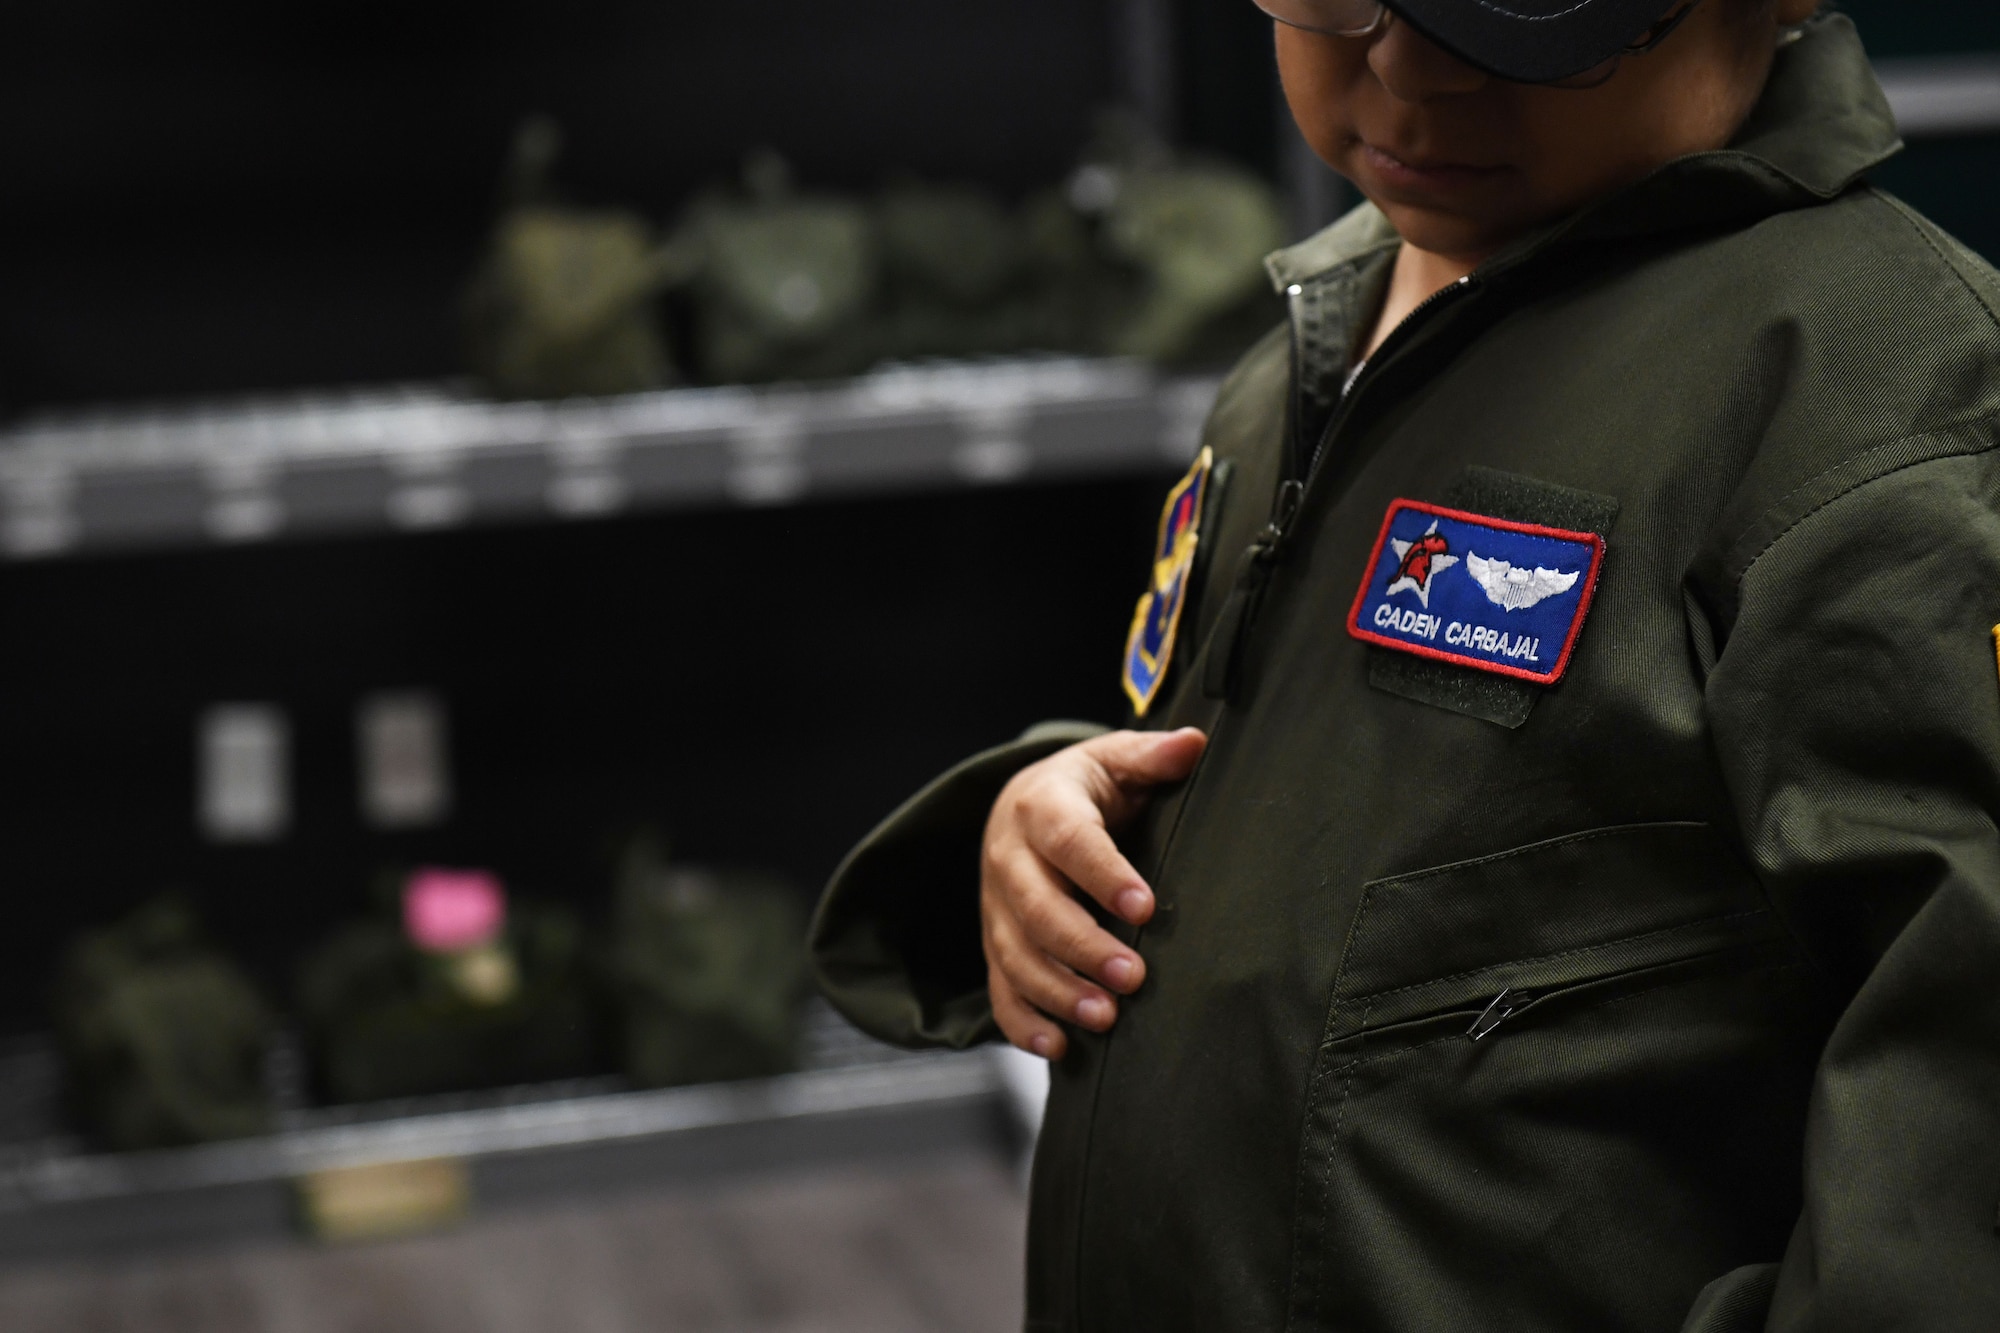 A young boy looks down at his name patch on his new flight suit